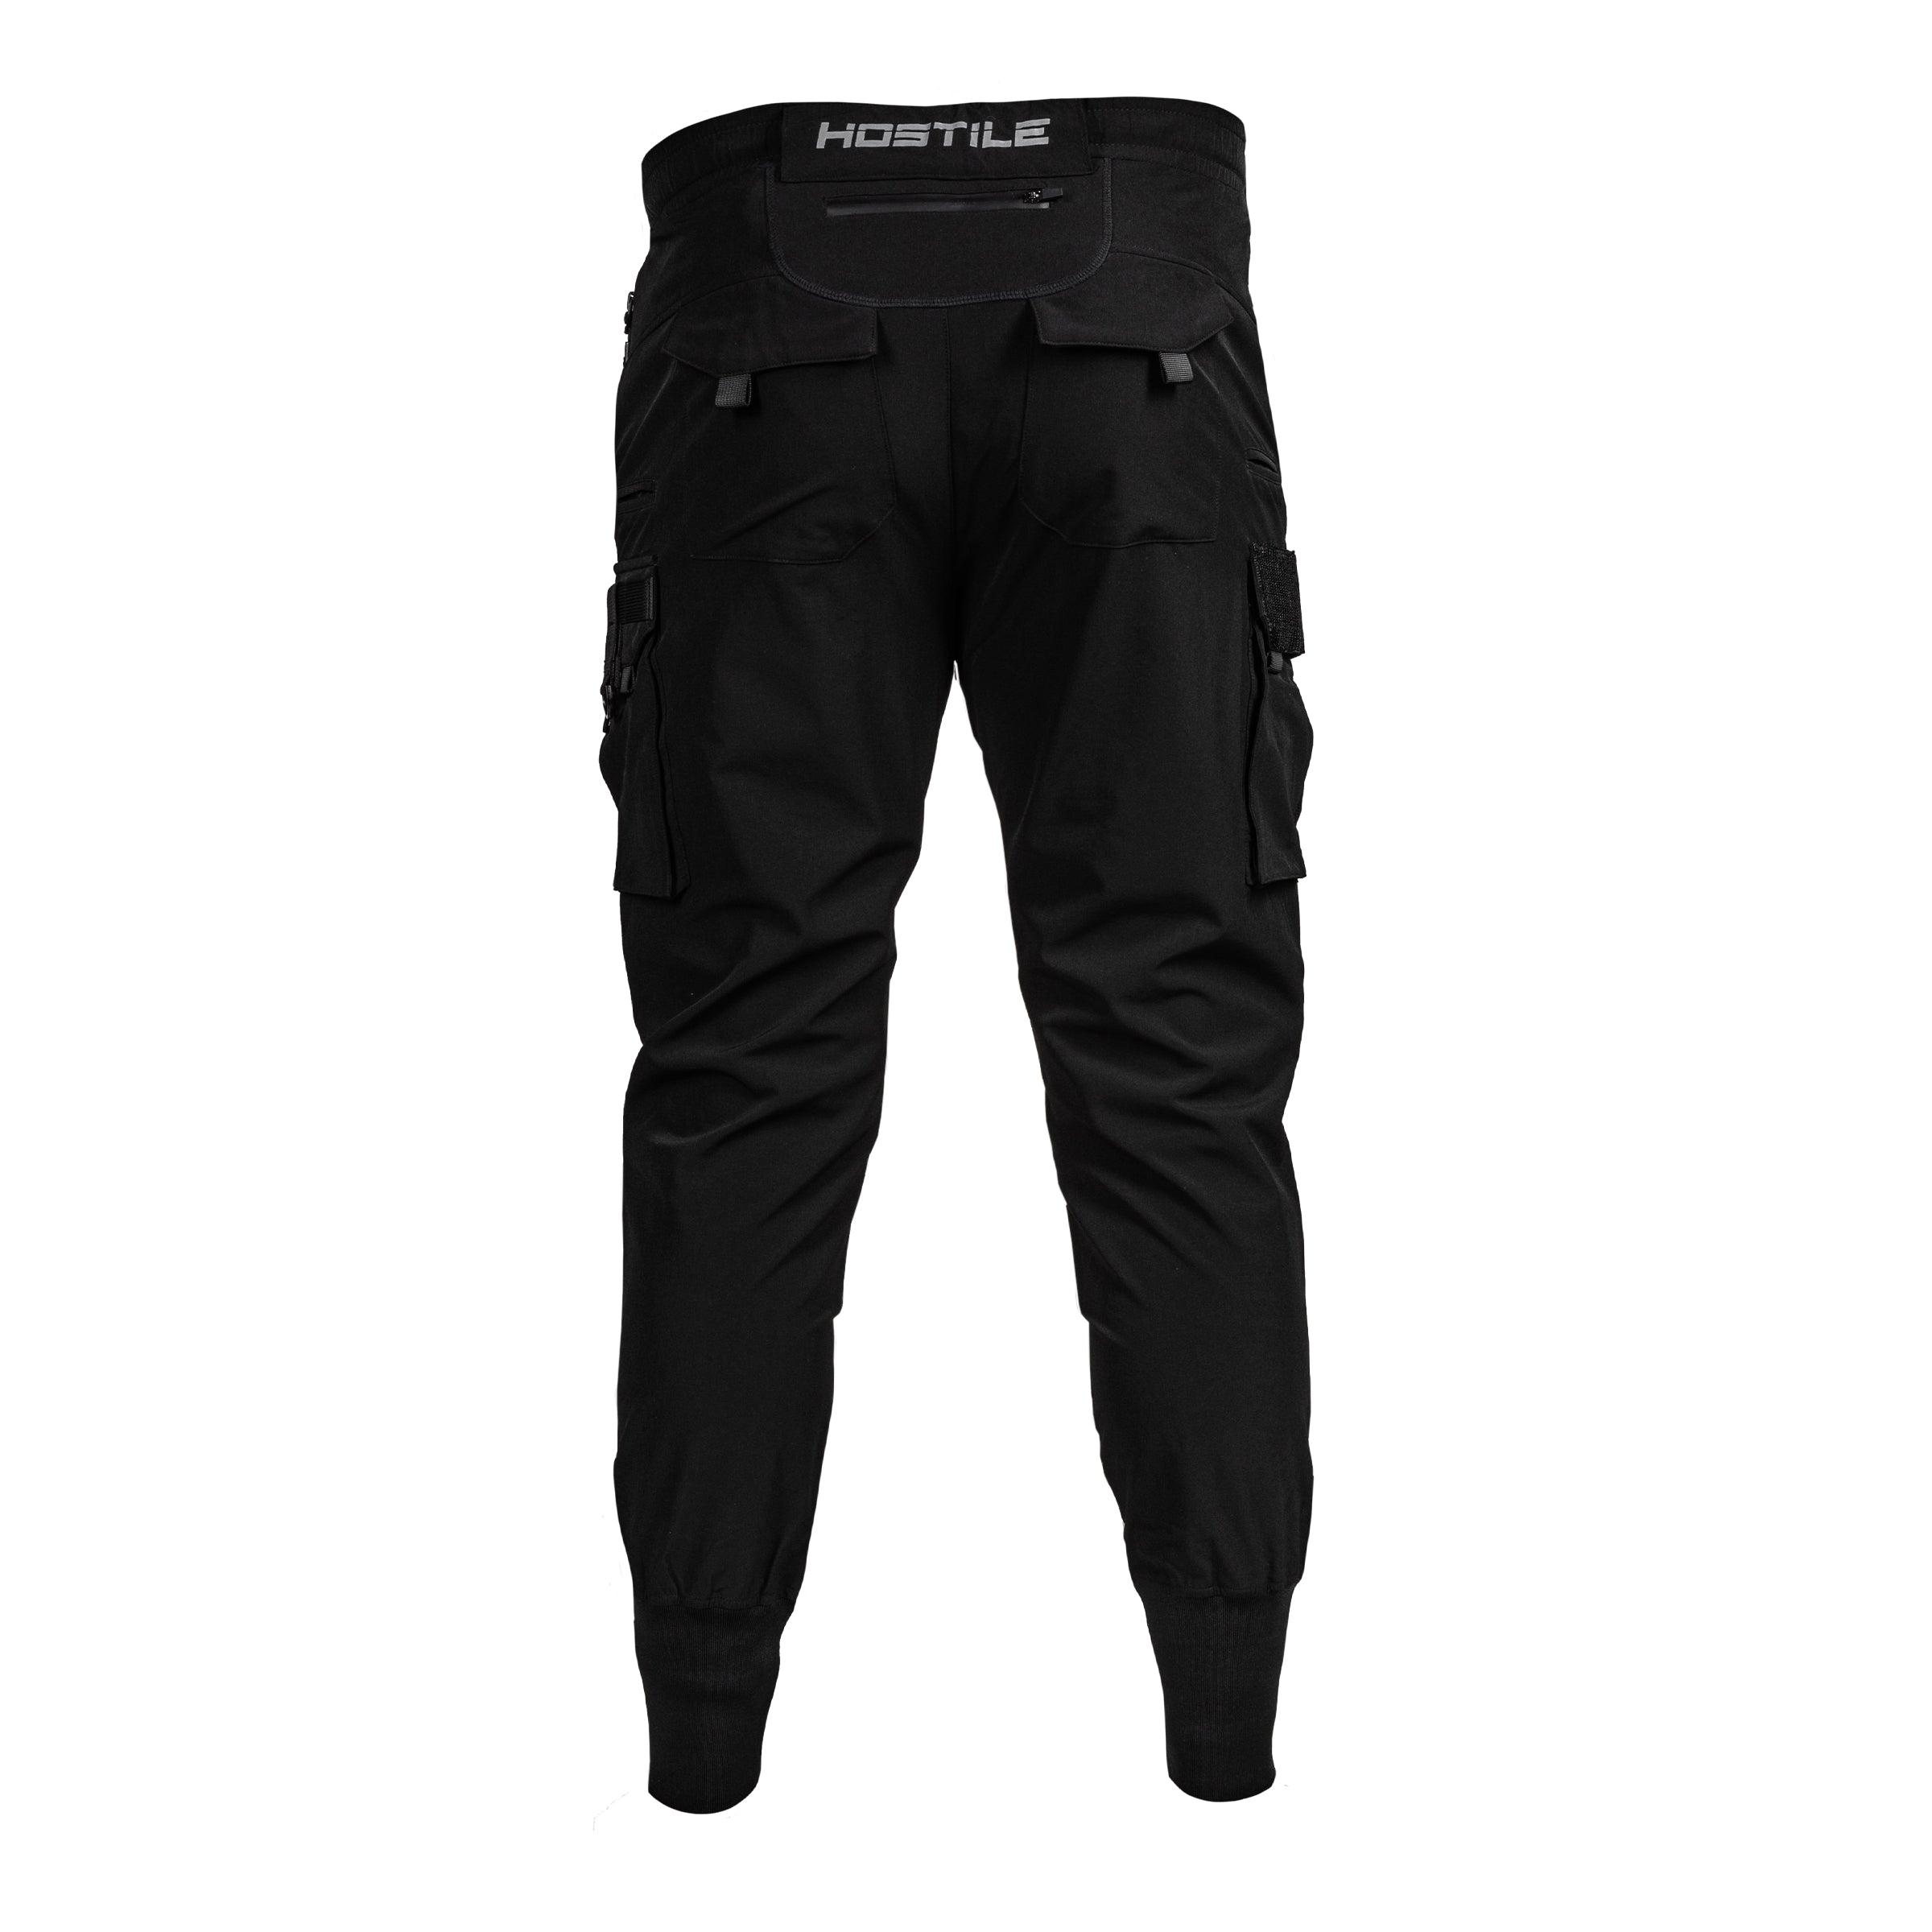 Aayomet Sweatpants For Men With Pockets Mens Joggers Workout Pants Slim Fit  Lightweight Track Pants Jogger Pants with Zipper Pockets,Black 4XL -  Walmart.com